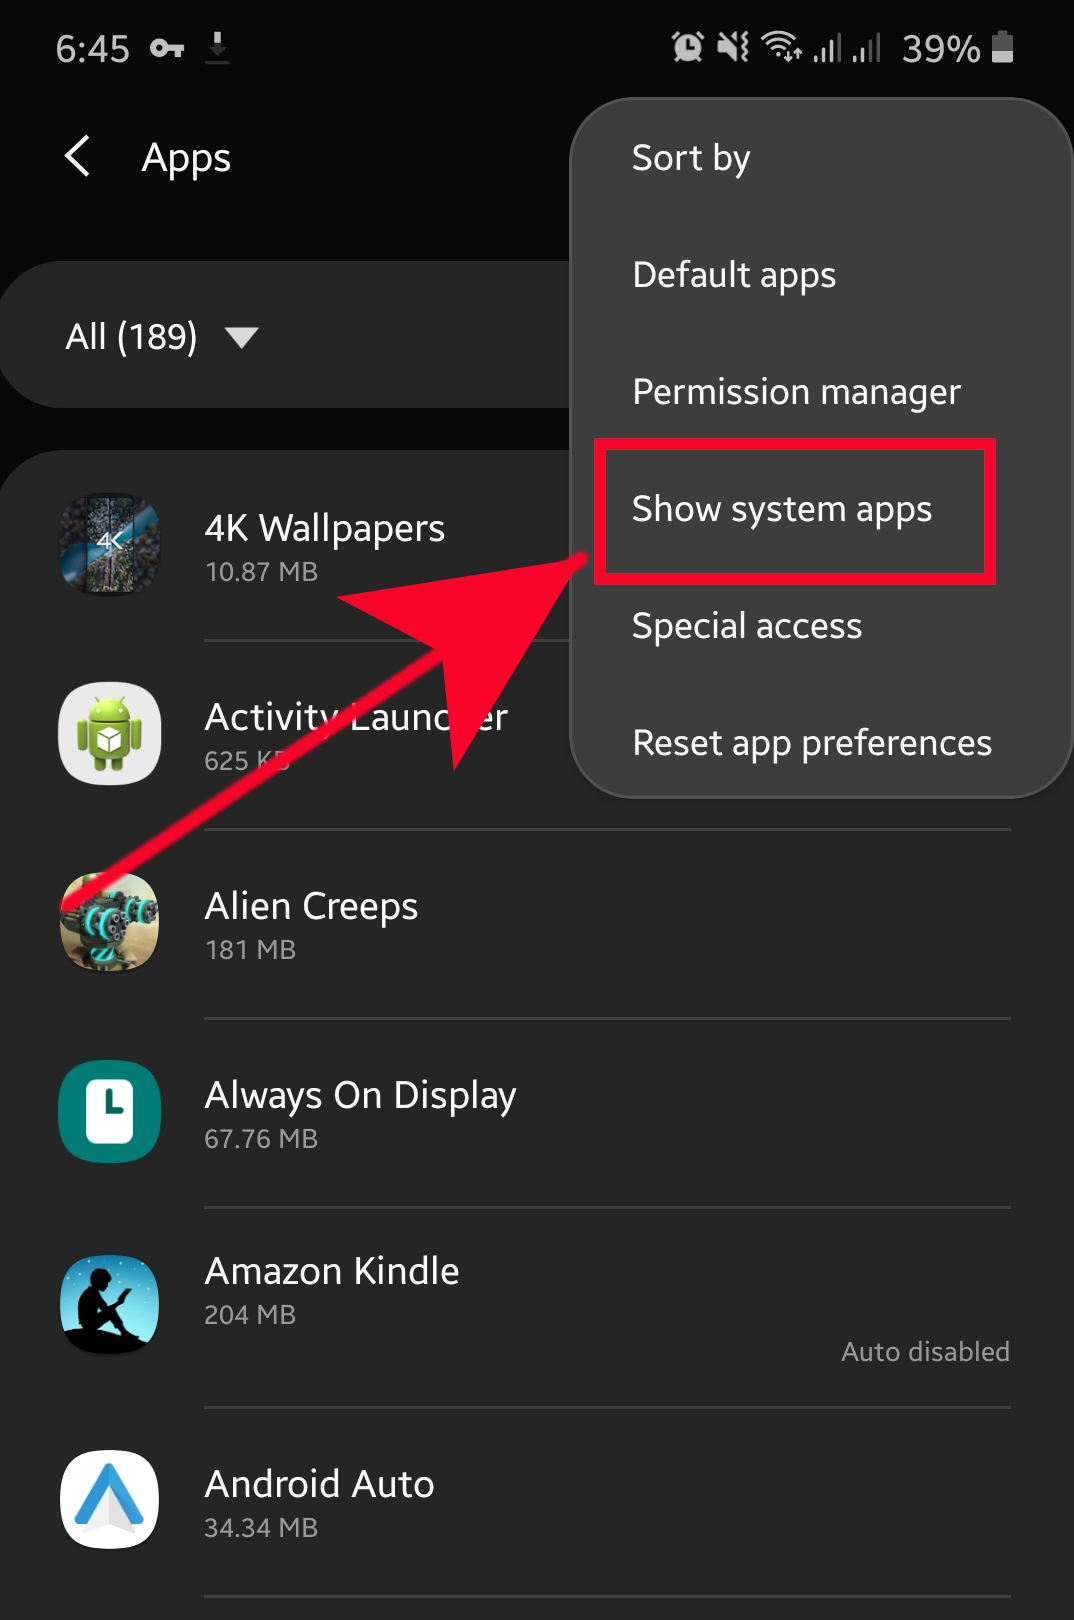 show system apps